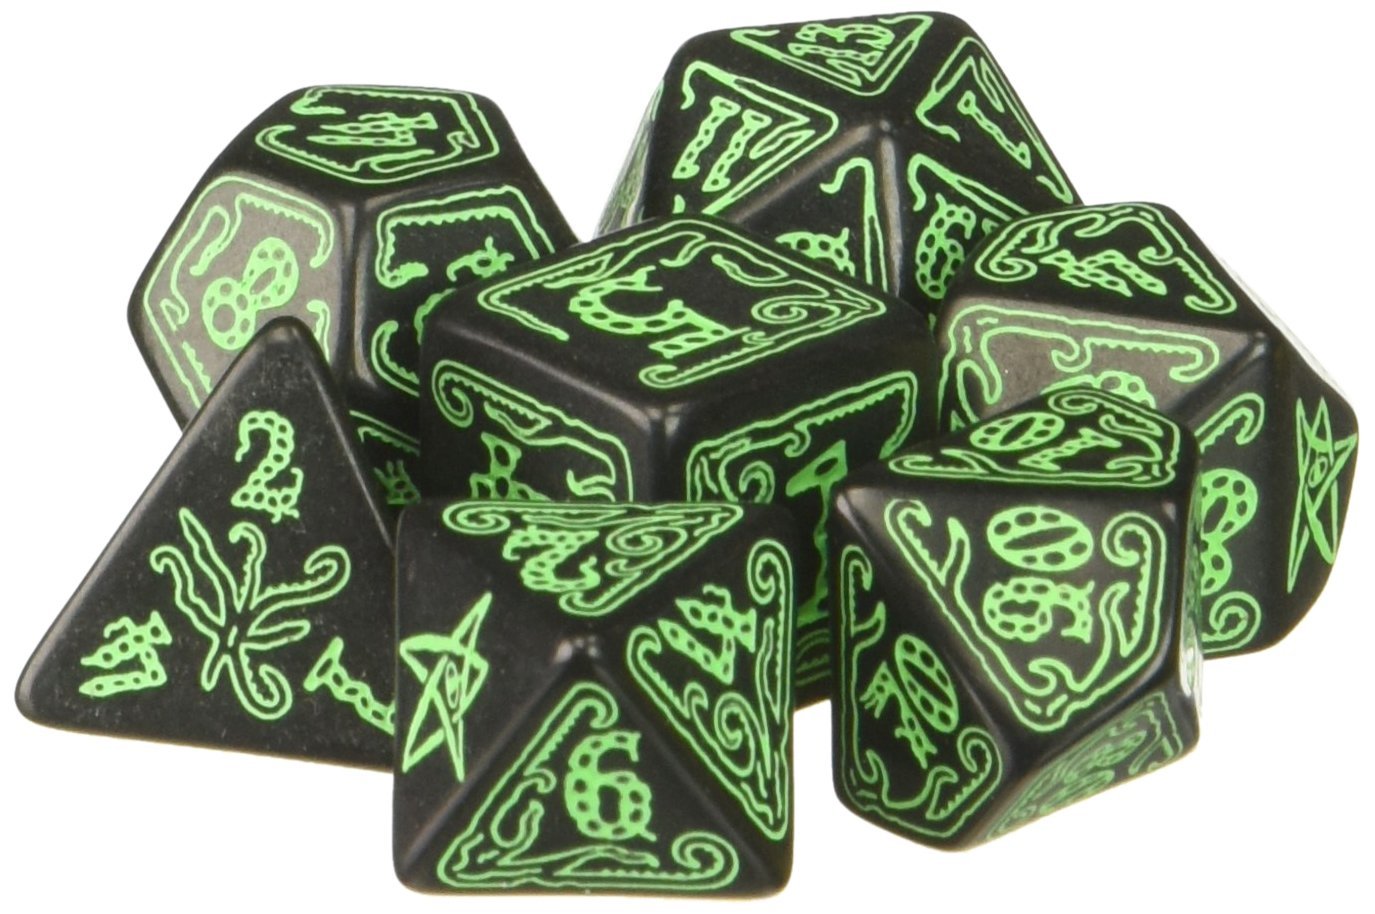 10 RPG Dice Sets to Level Up Game Night